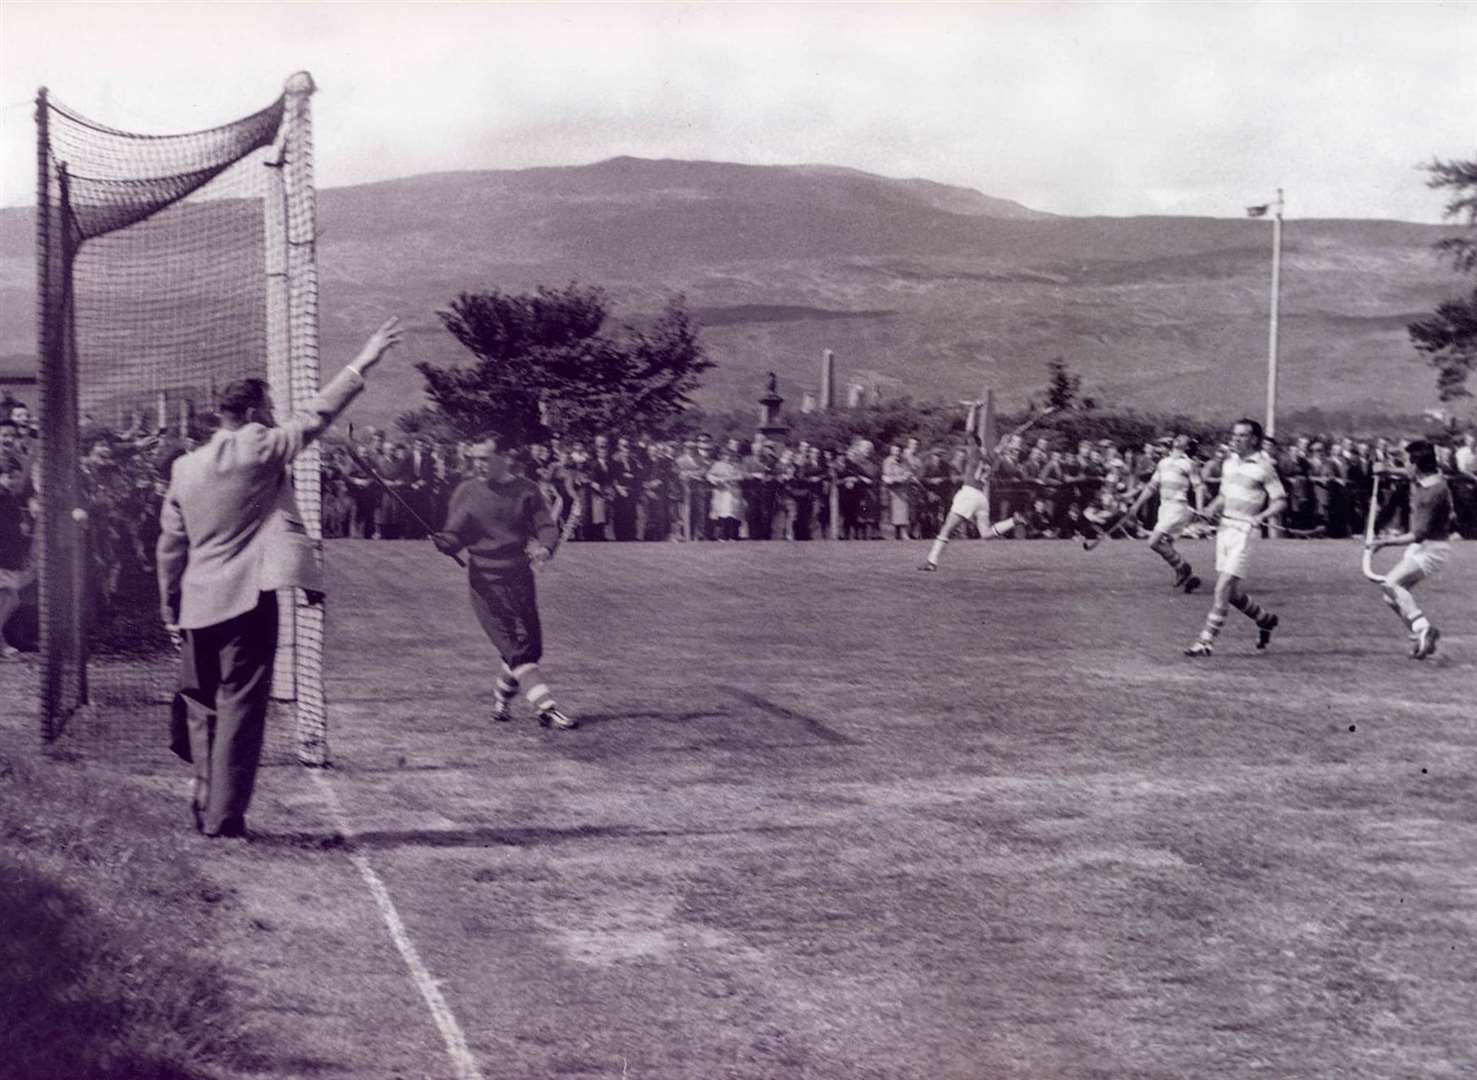 Donnie (12) scoring in 1961 Camanachd Cup Final versus Oban Celtic at Fort William. Kingussie won 2-1 to win the Camanachd for the first time in 40 years